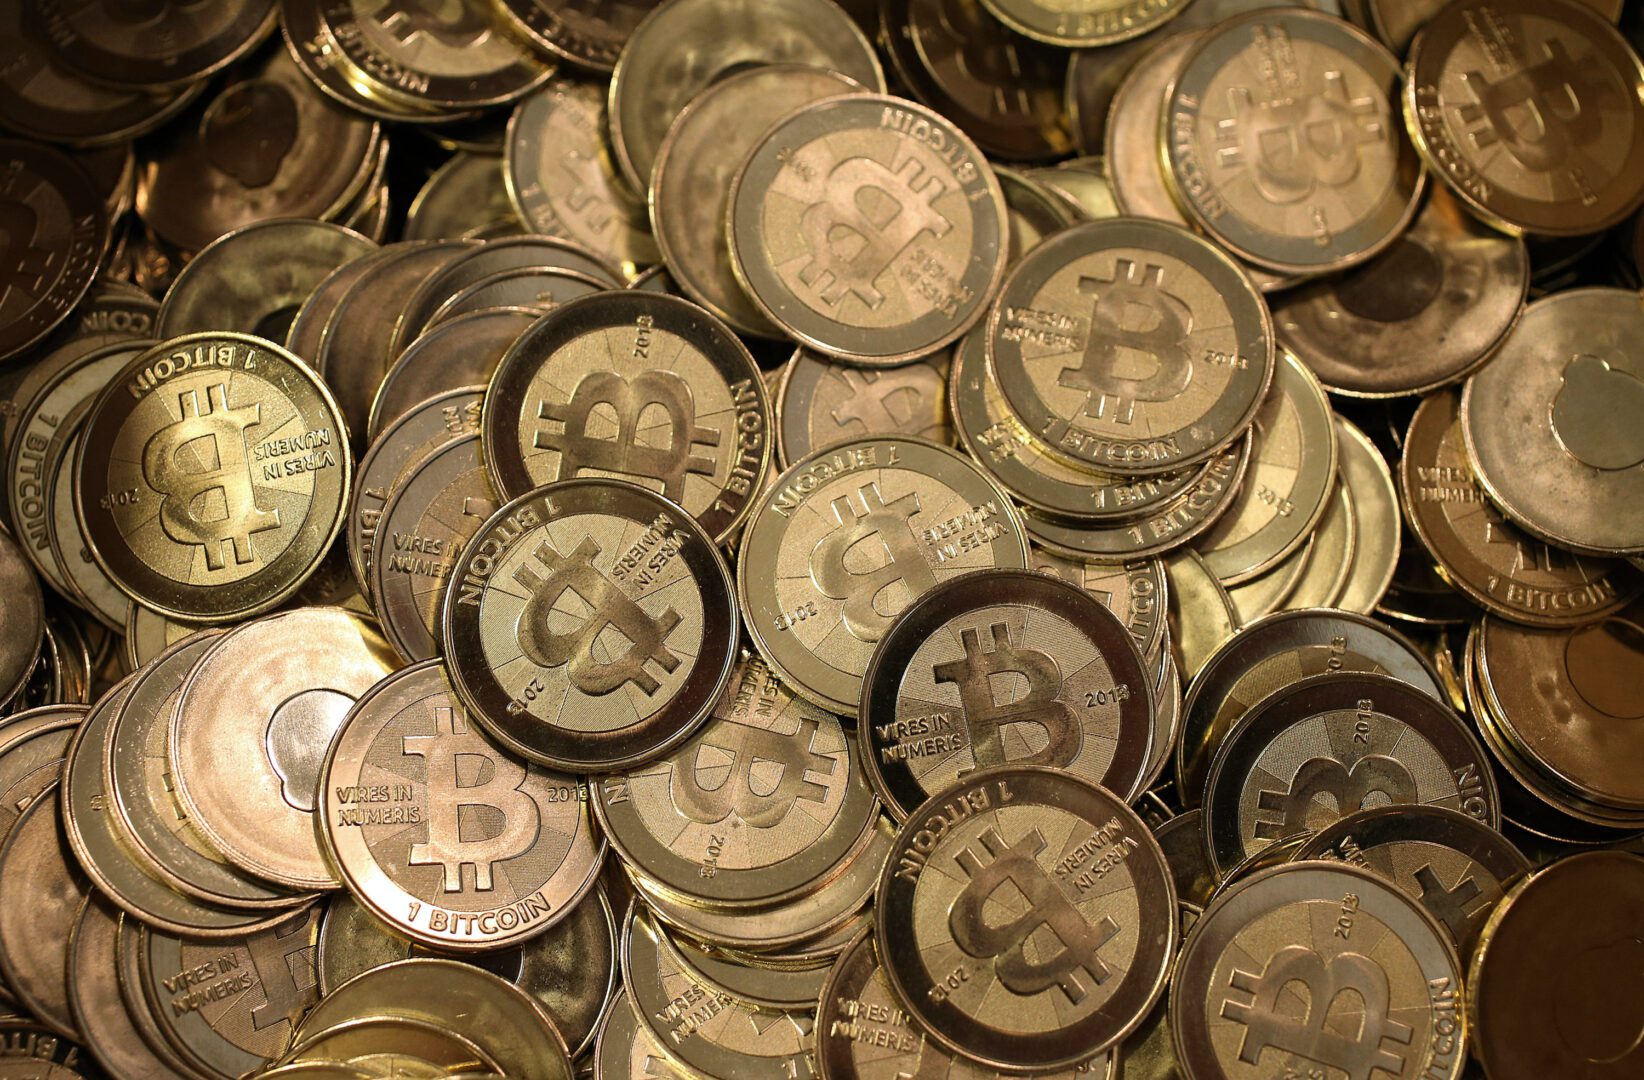 A pile of gold and silver bitcoin coins.